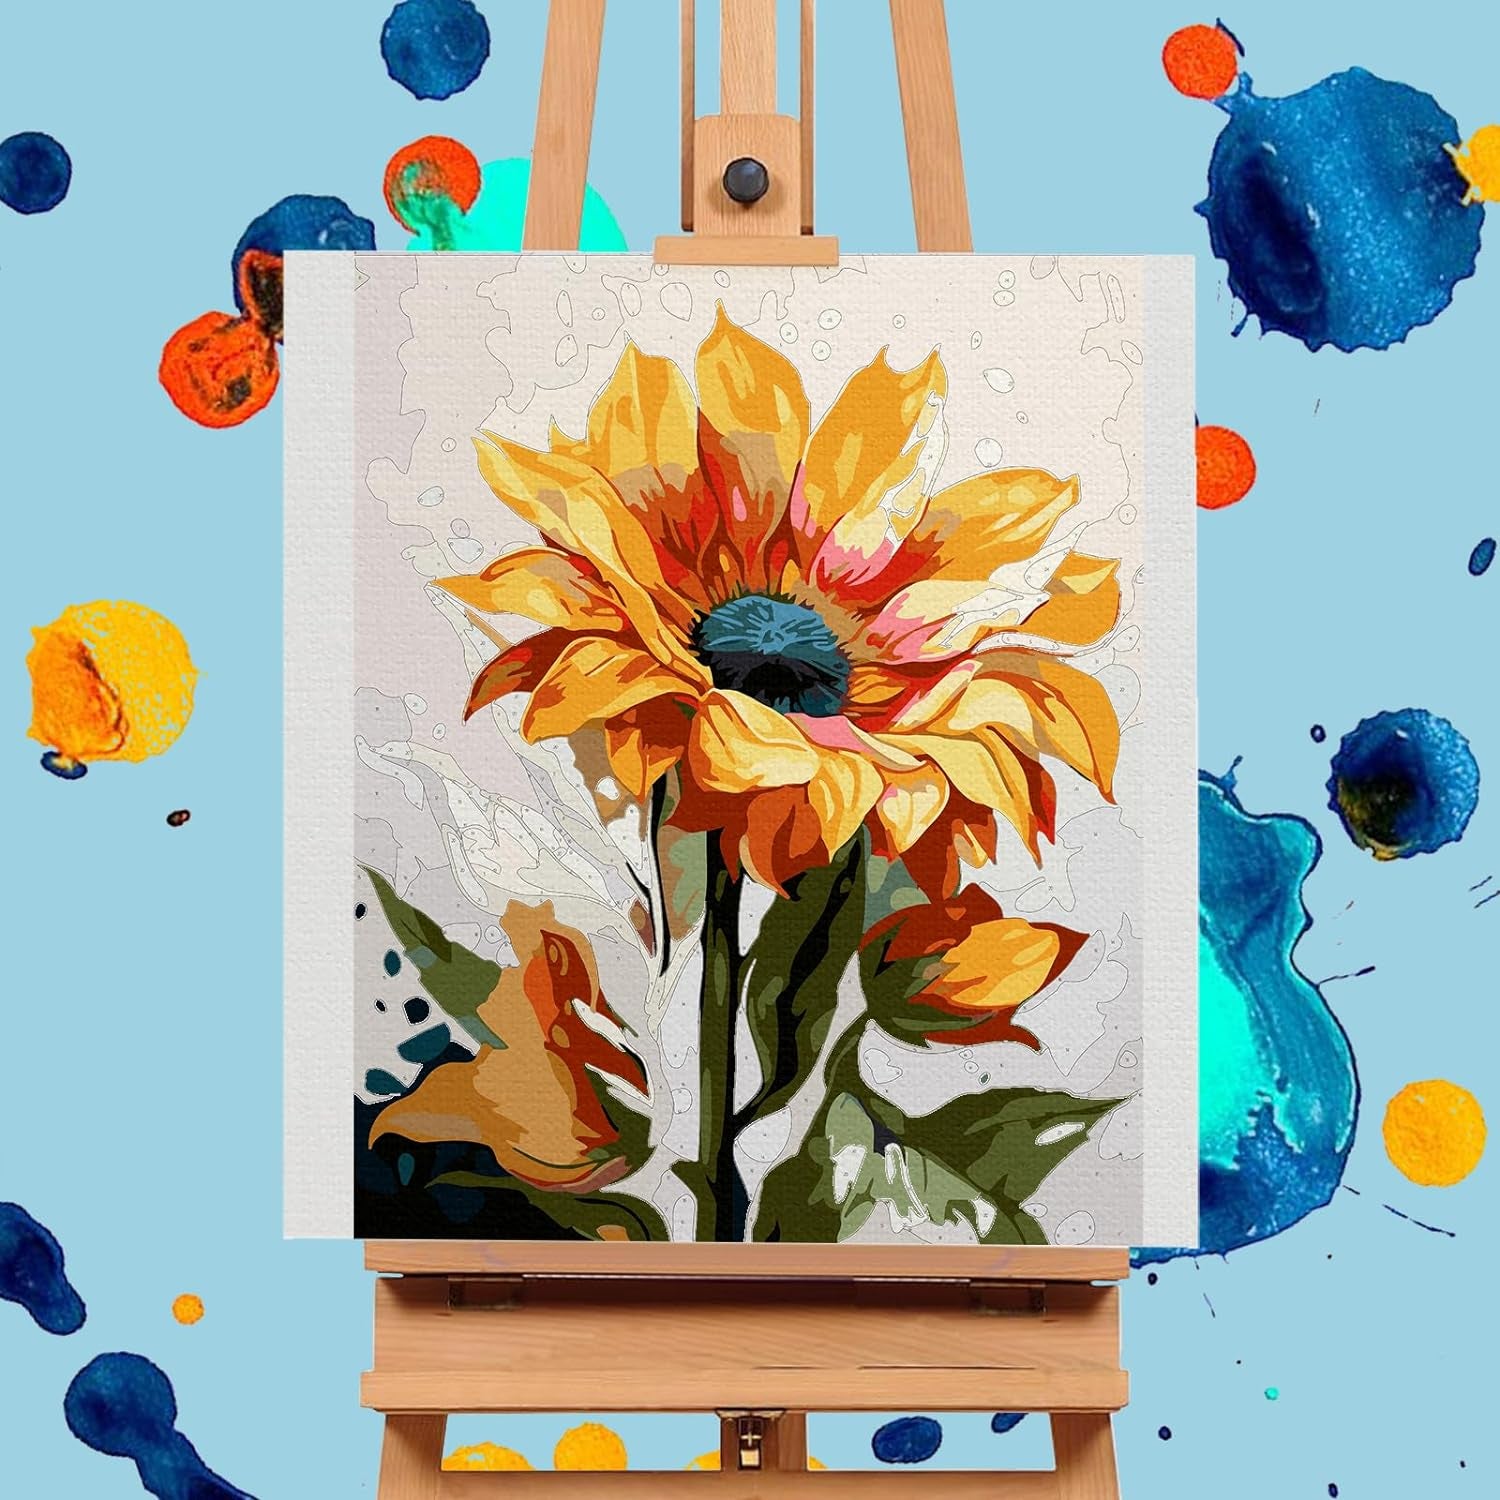 Paint by Numbers Kit for Adults Beginners, Sunflower Acrylic Adult Paint by Number Kits on Canvas, Abstract Landscape Digital Oil Number Painting Kits for Home Decor Gift 16"X20"